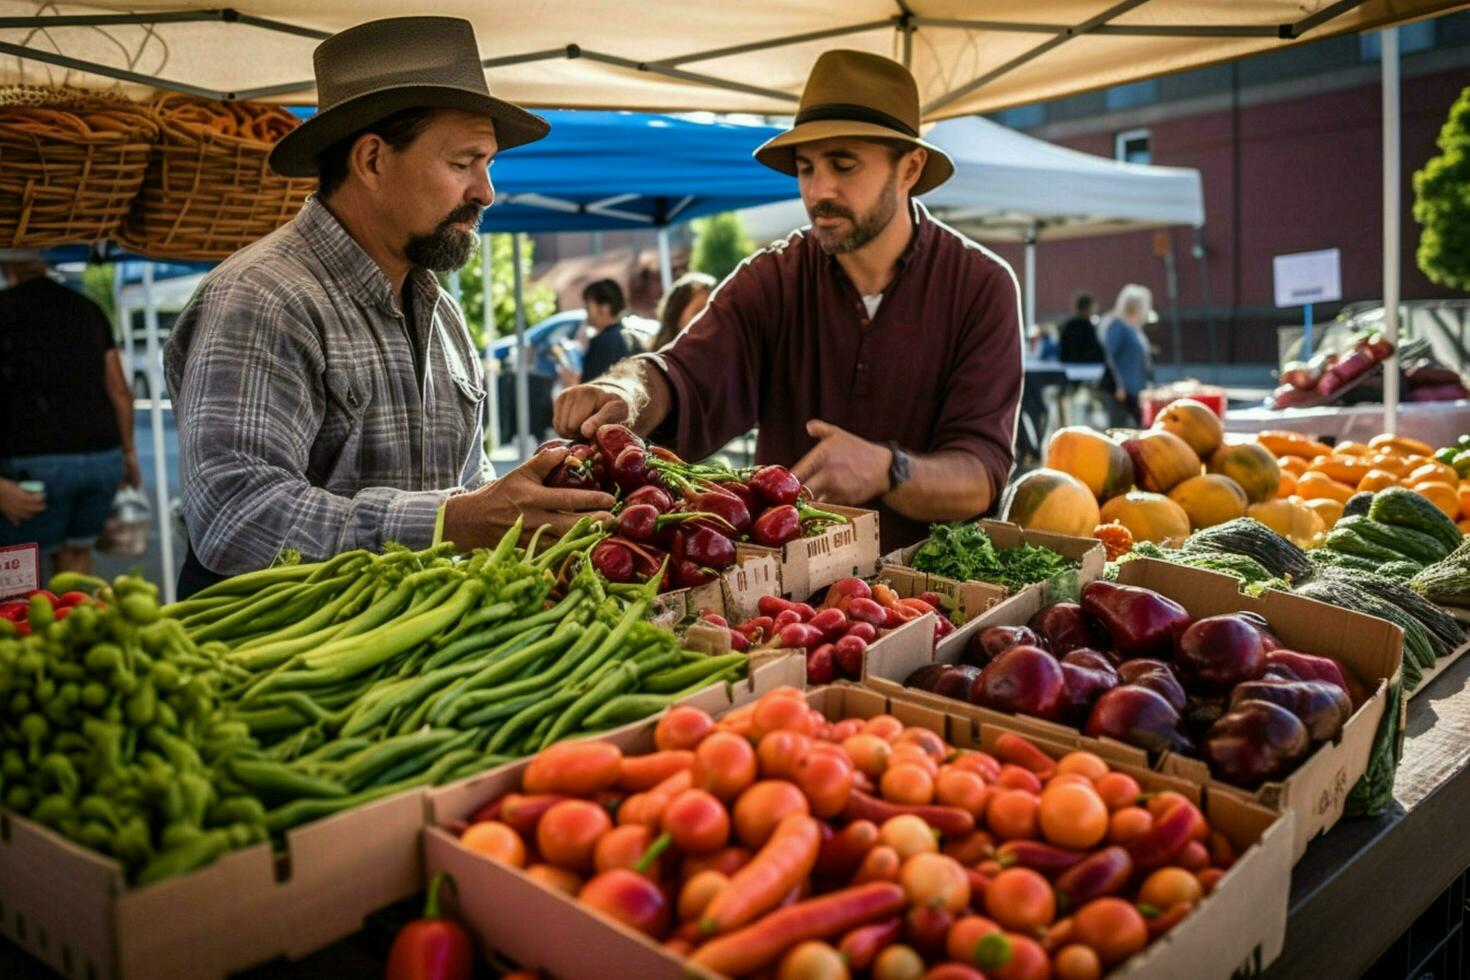 Trying new foods at a farmers market photo